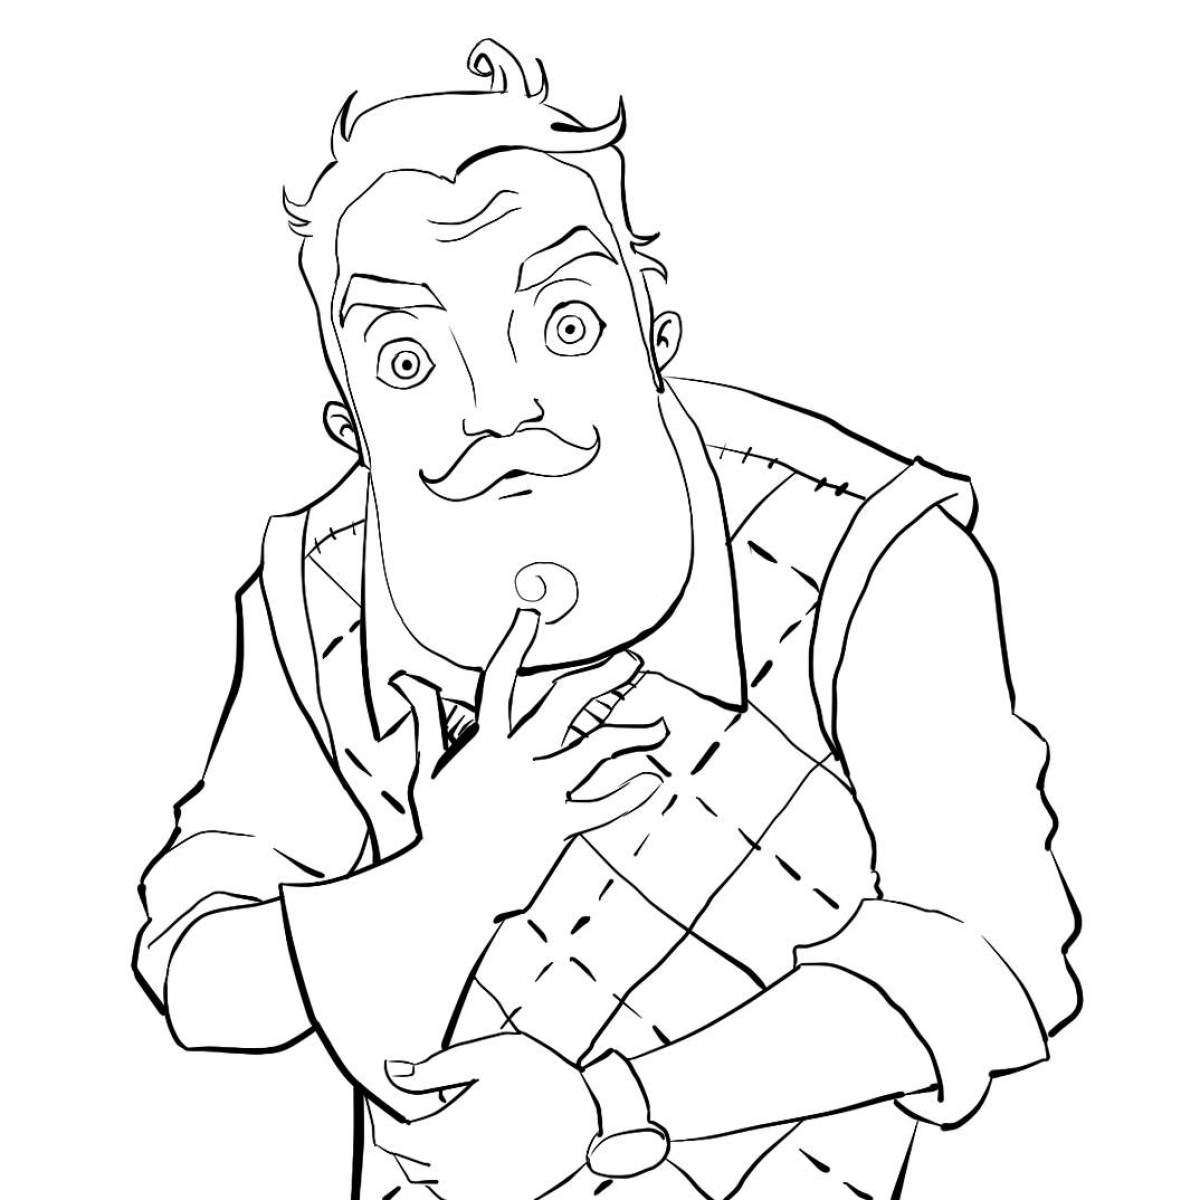 Colorful hello neighbor coloring page